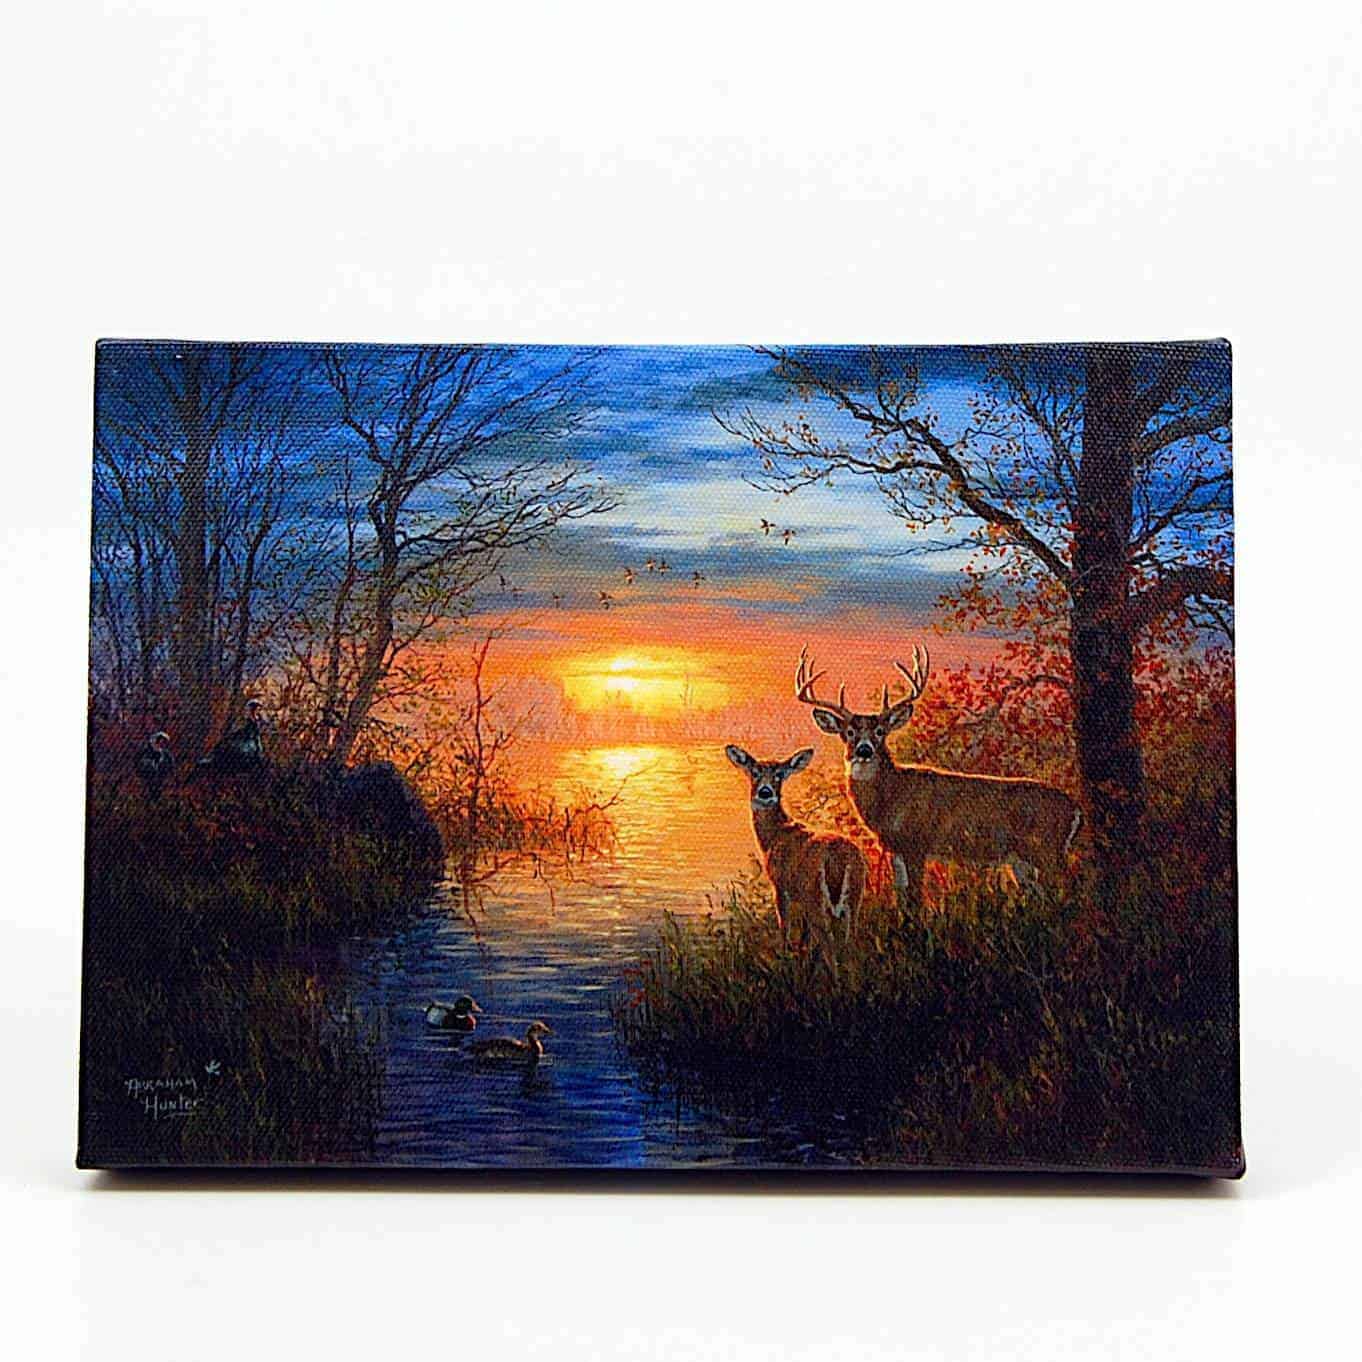 This Deer by Water at Dawn LED Light Up Lighted Canvas Wall or Tabletop Picture Art is made with love by Premier Homegoods! Shop more unique gift ideas today with Spots Initiatives, the best way to support creators.